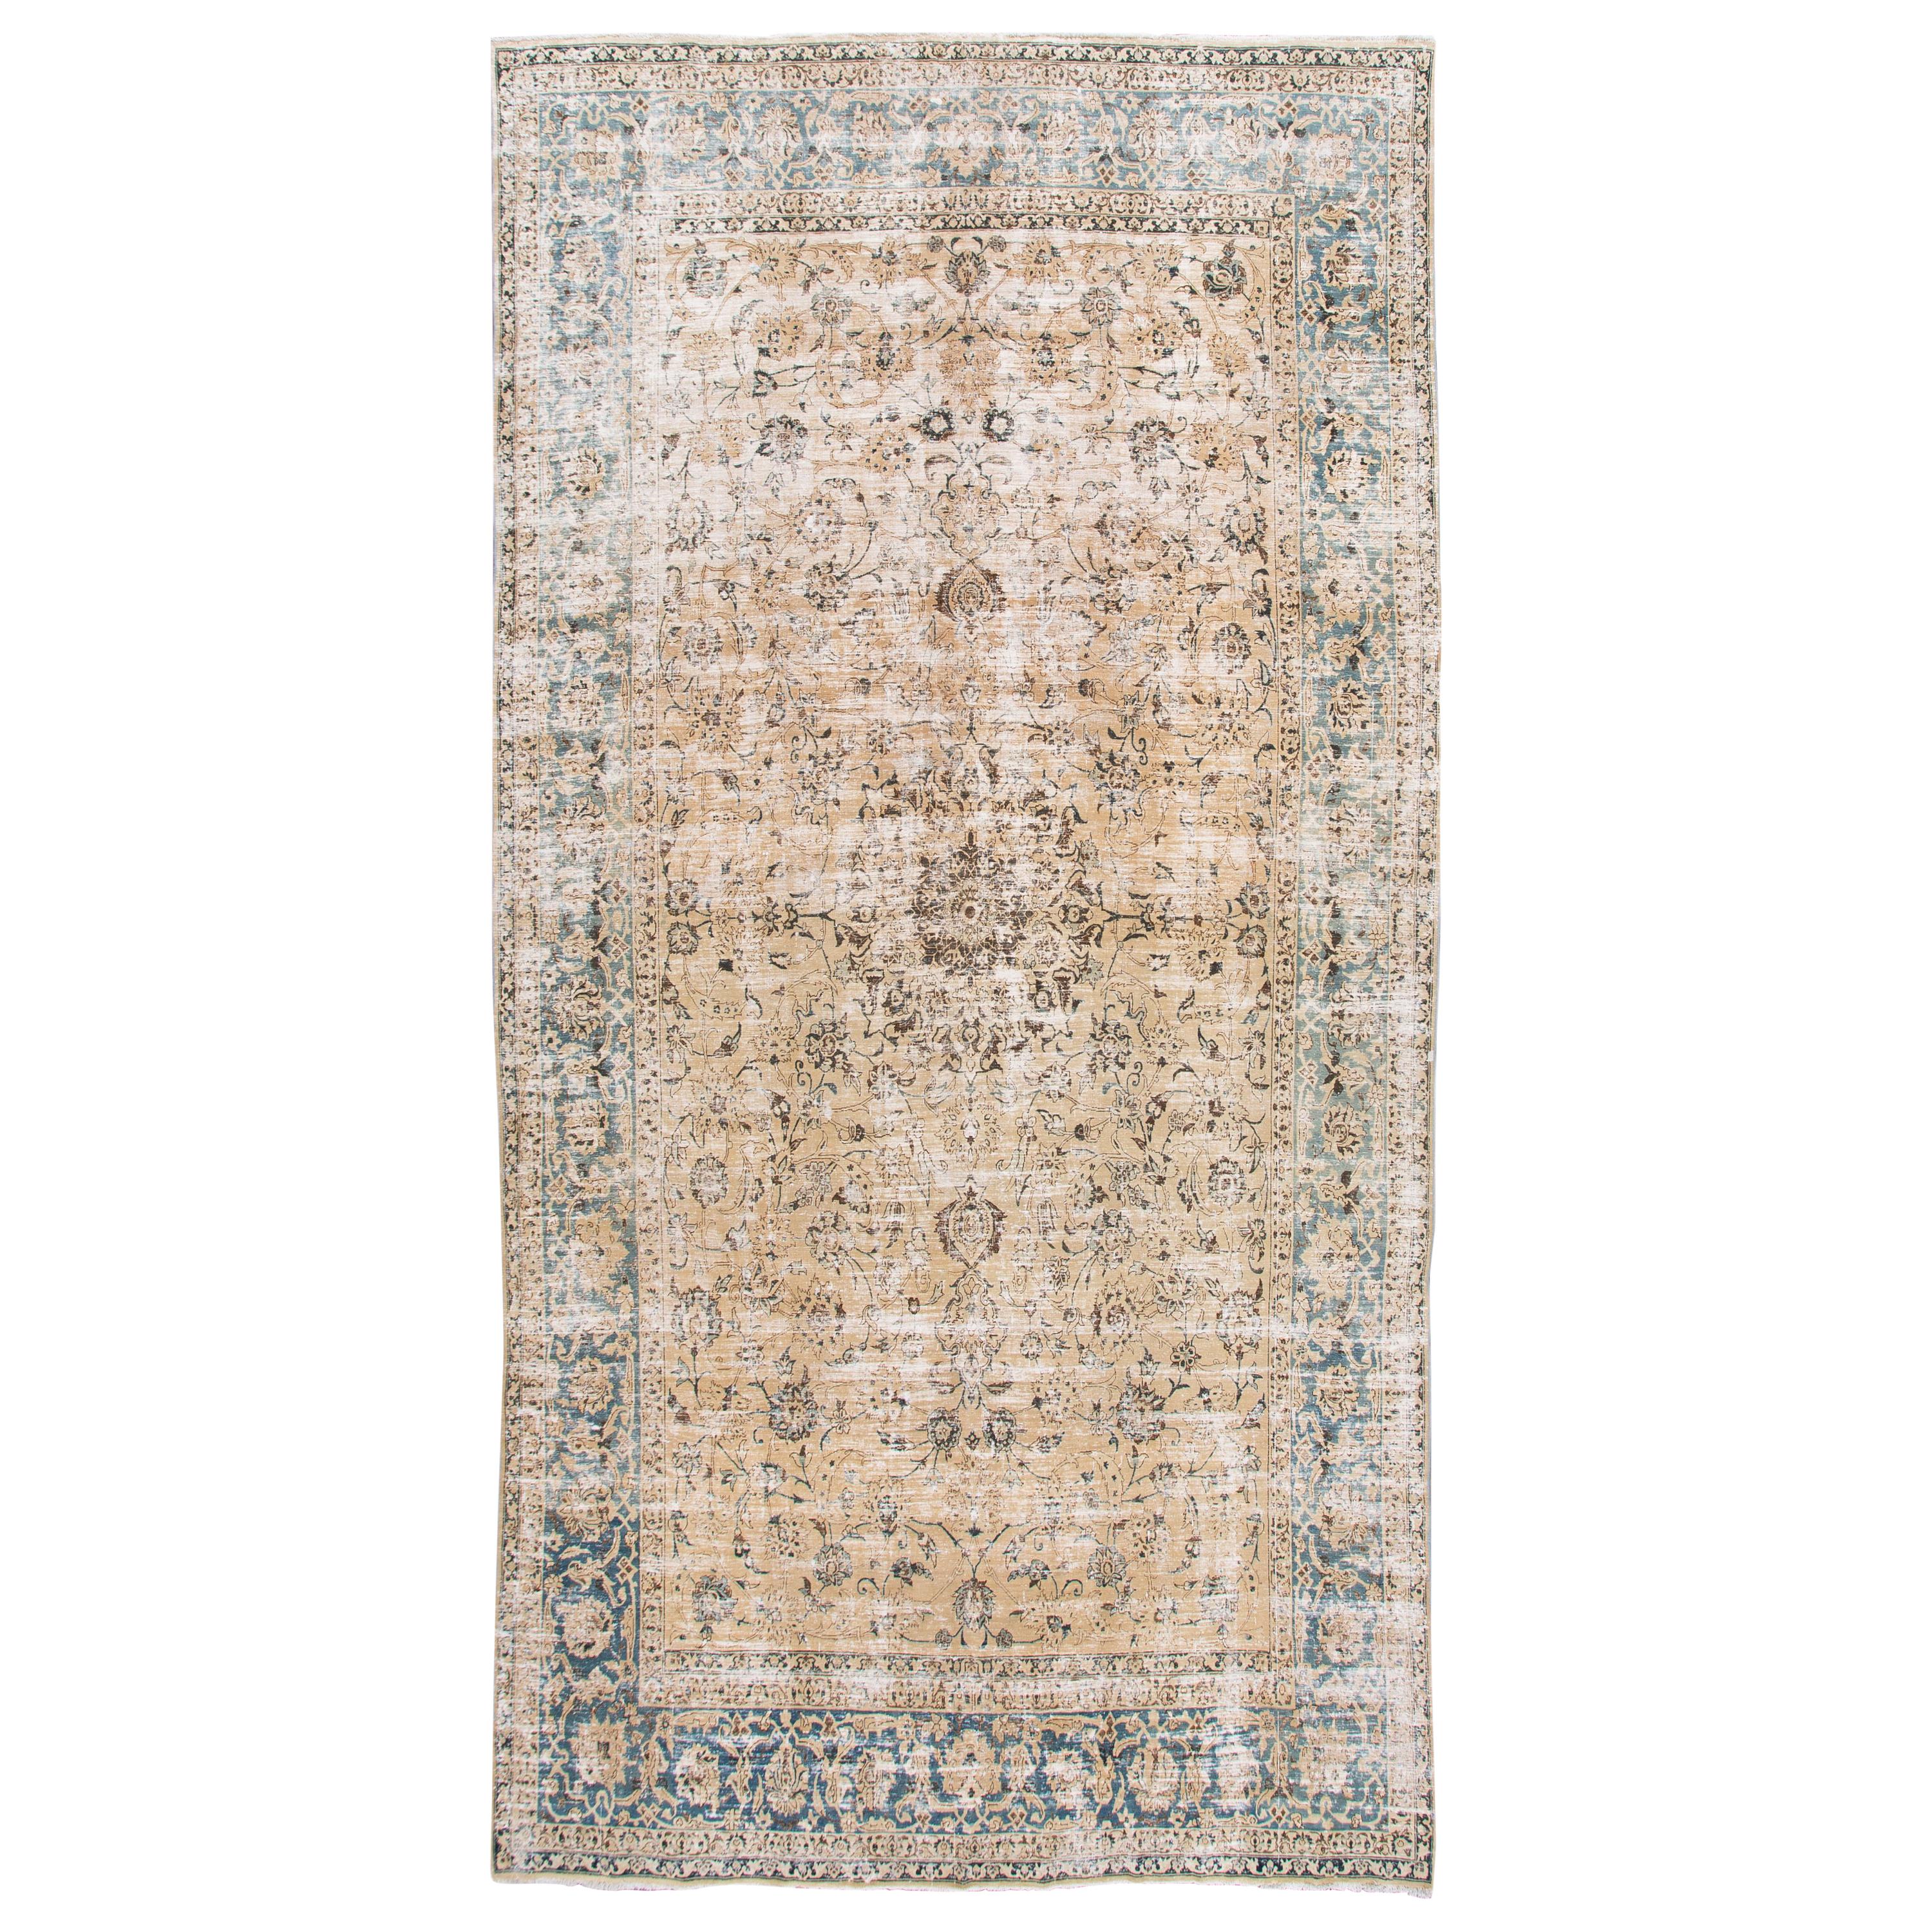 Antique Malayer Handmade Beige Shabby Chic Floral Wool Rug For Sale